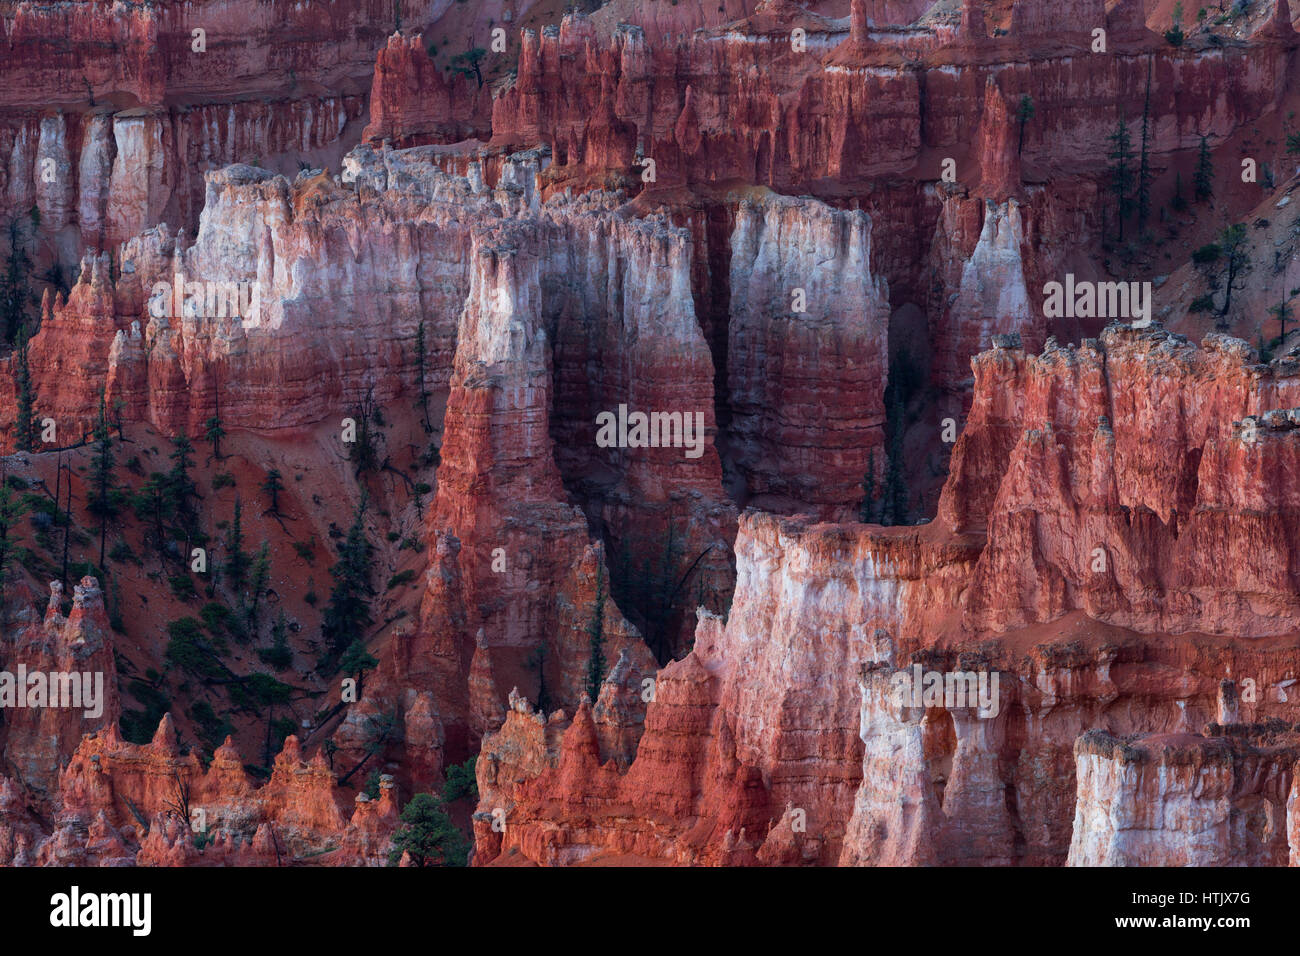 Bryce Amphitheater rock formation, Bryce Canyon National Park, Utah, USA Banque D'Images